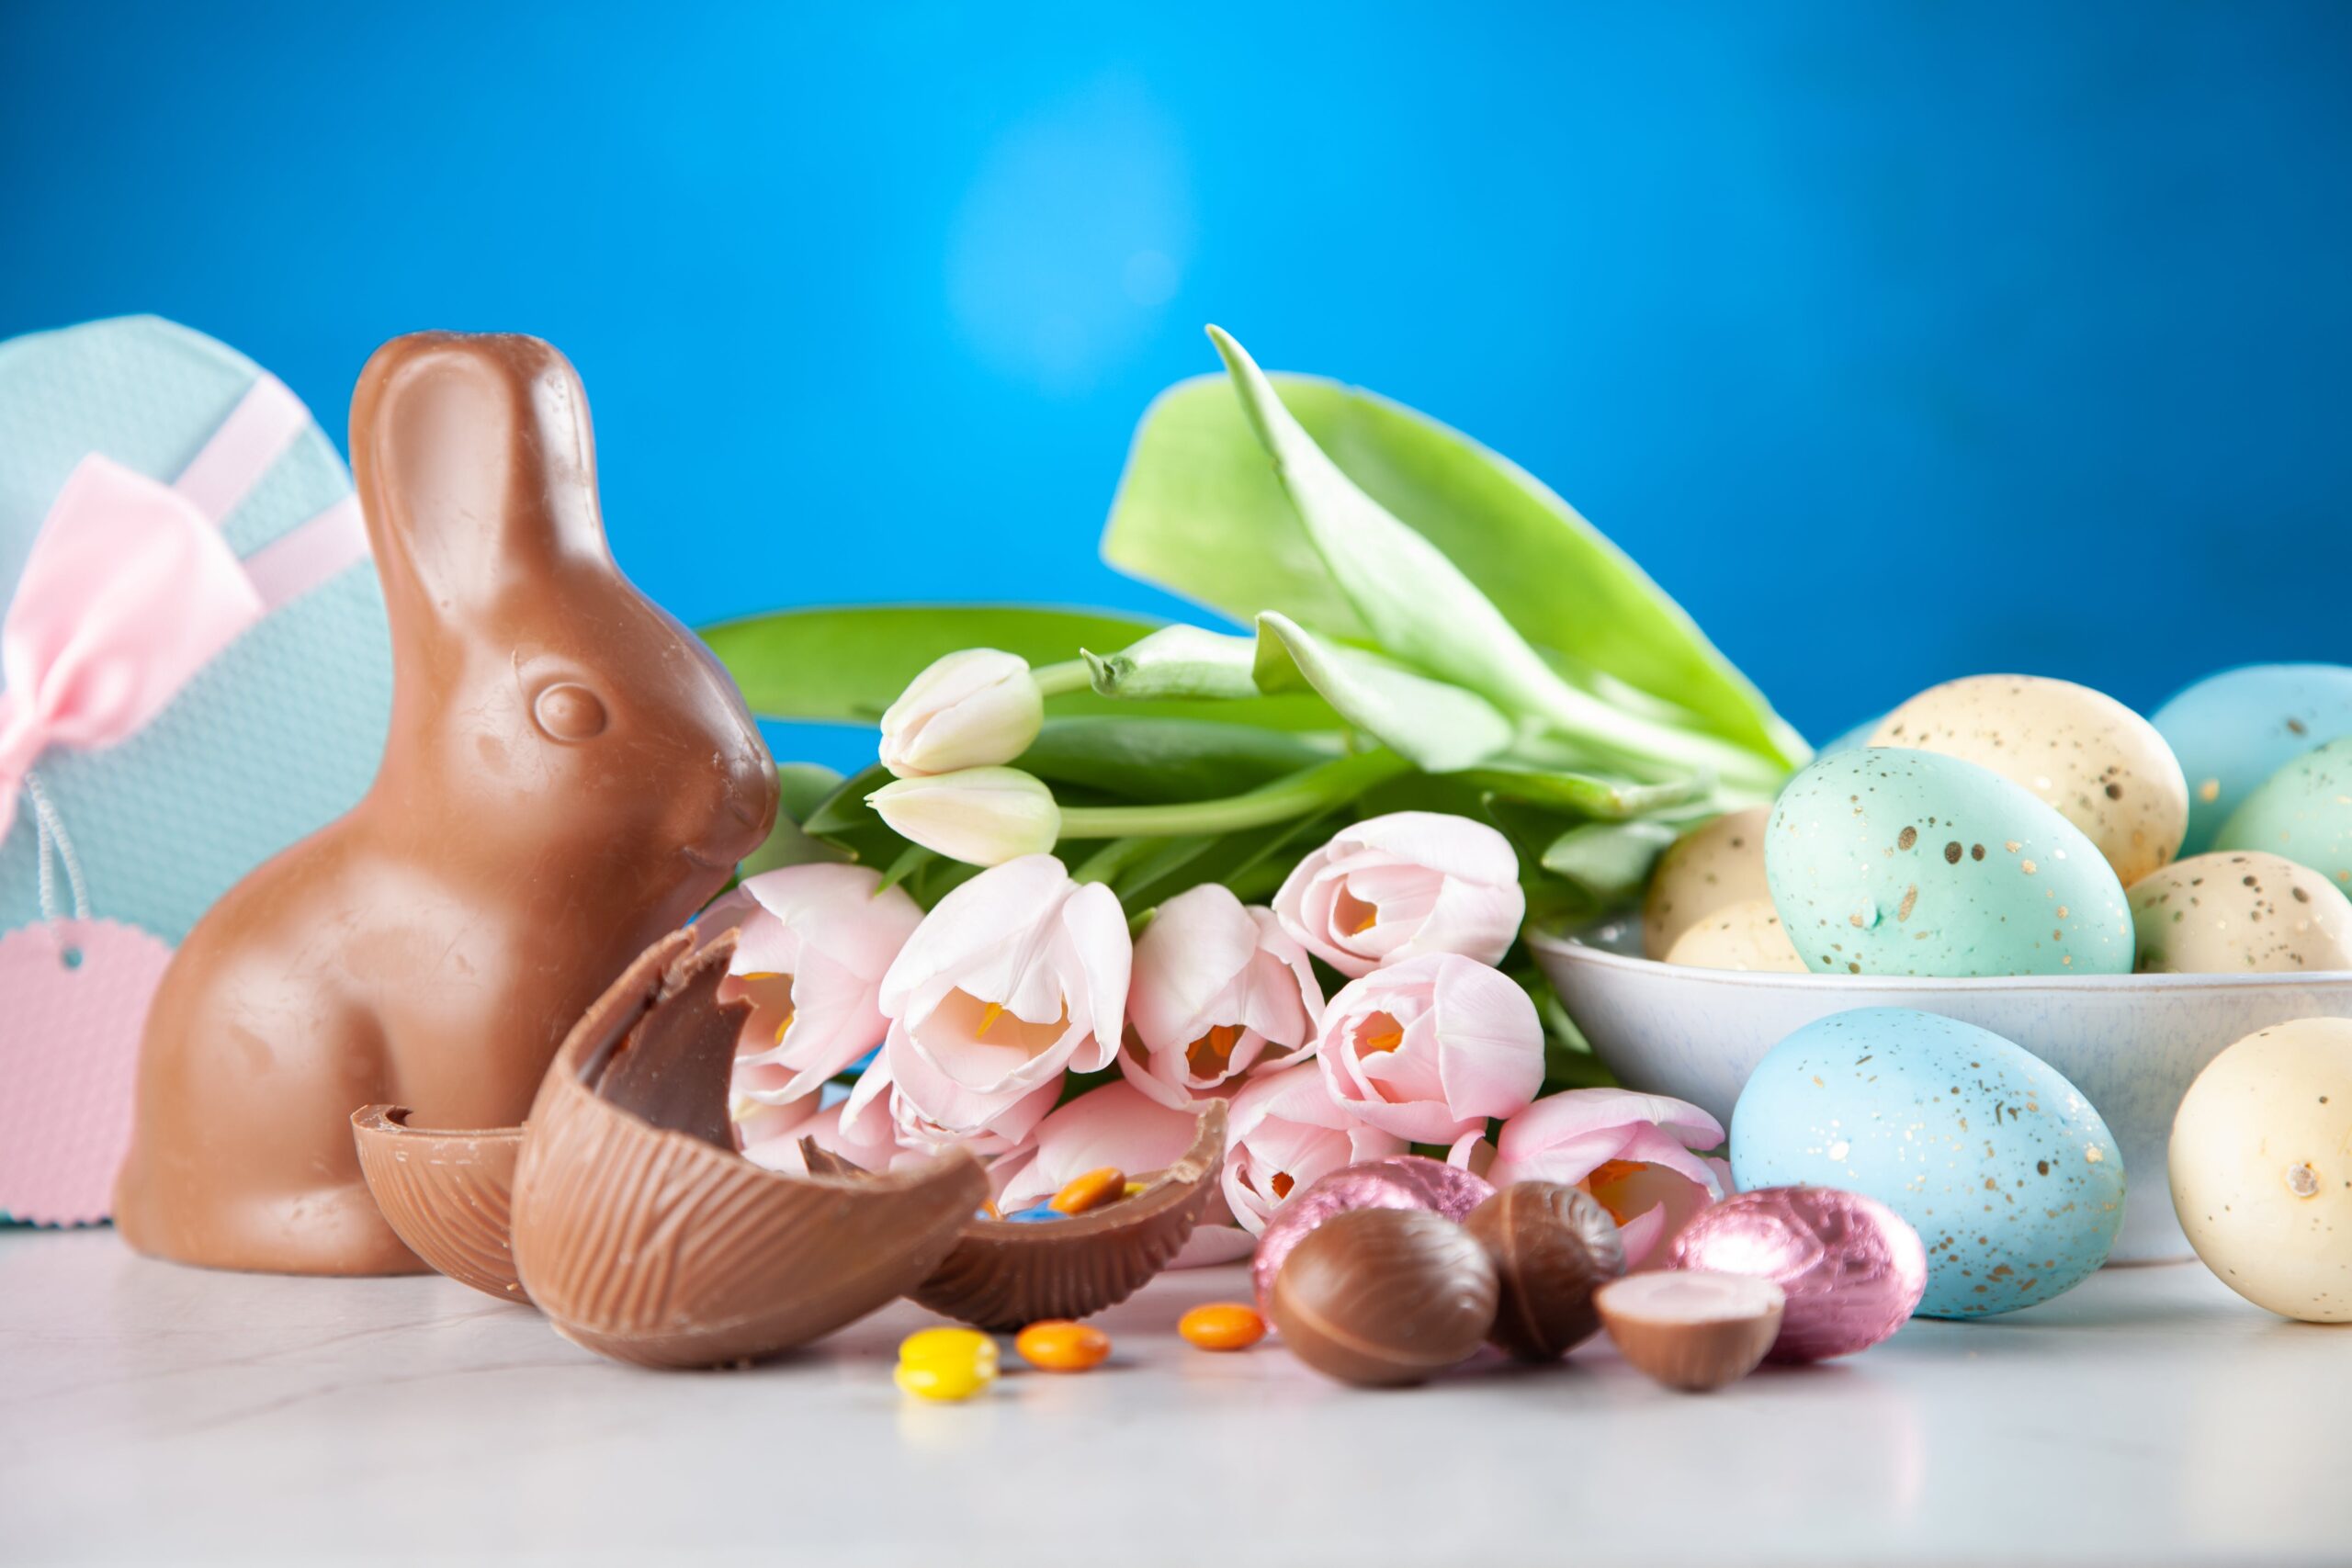 Whats Your Favorite Way To Enjoy Pashka With Decorative Elements For Easter Celebrations?